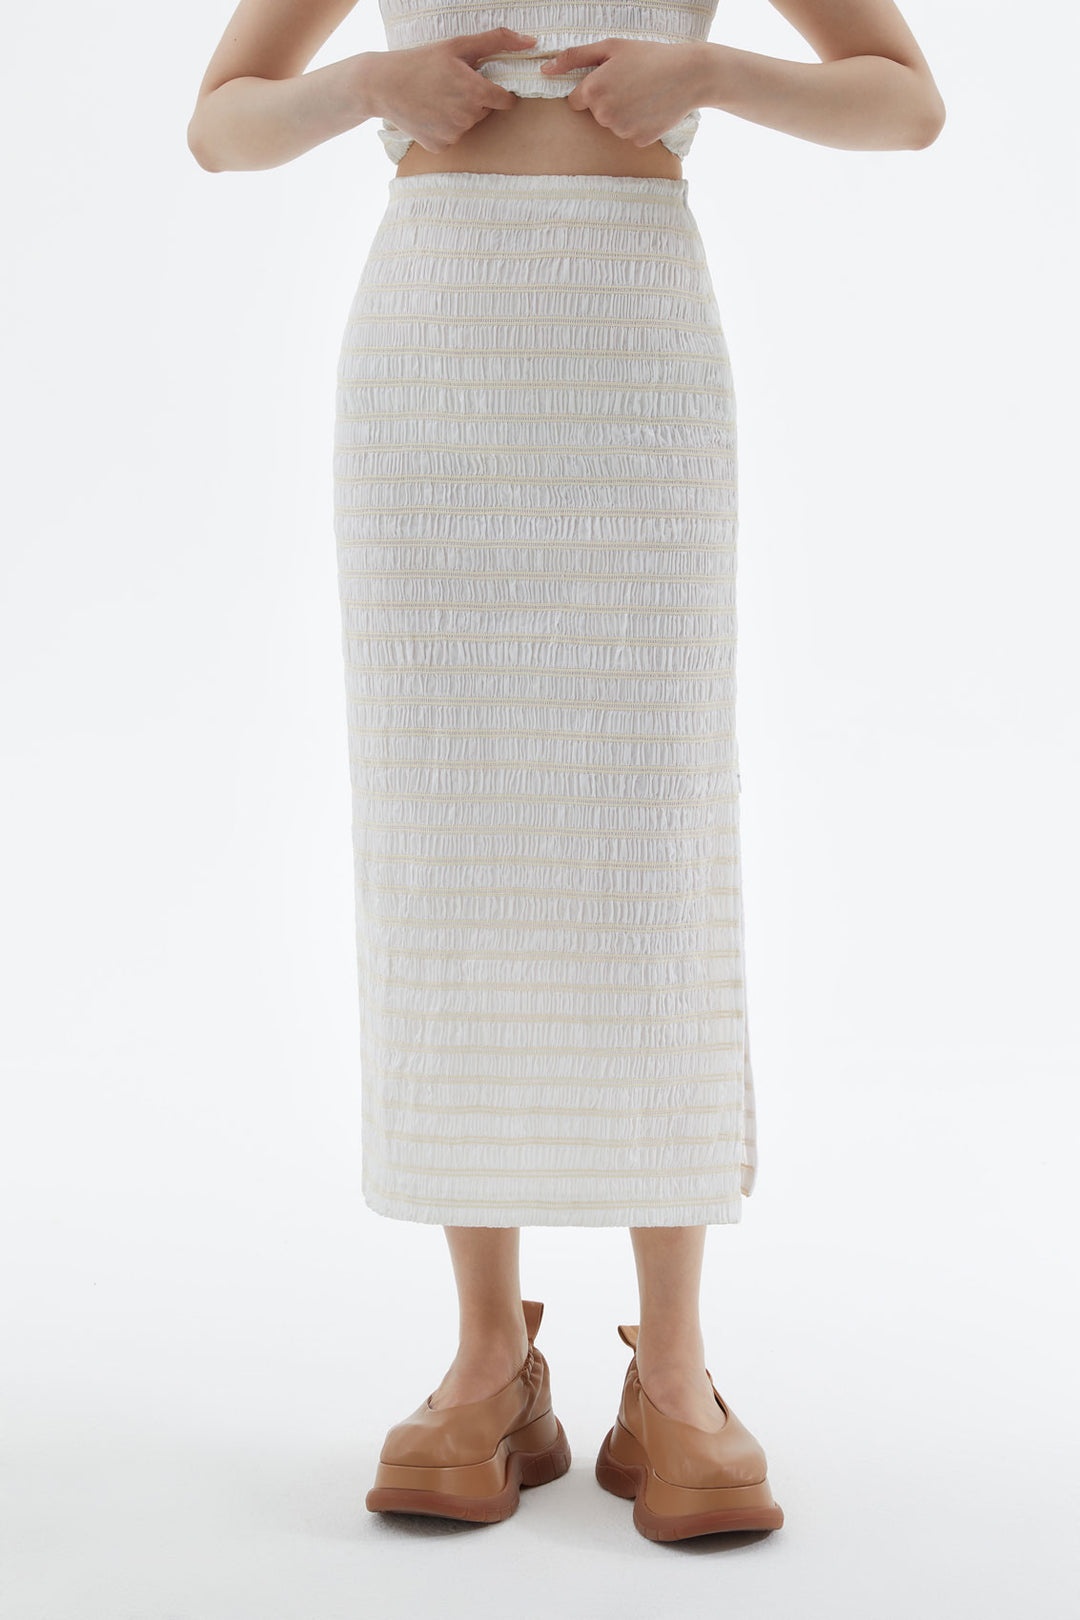 EMBROIDERED CREAM STRETCH SKIRT - 1